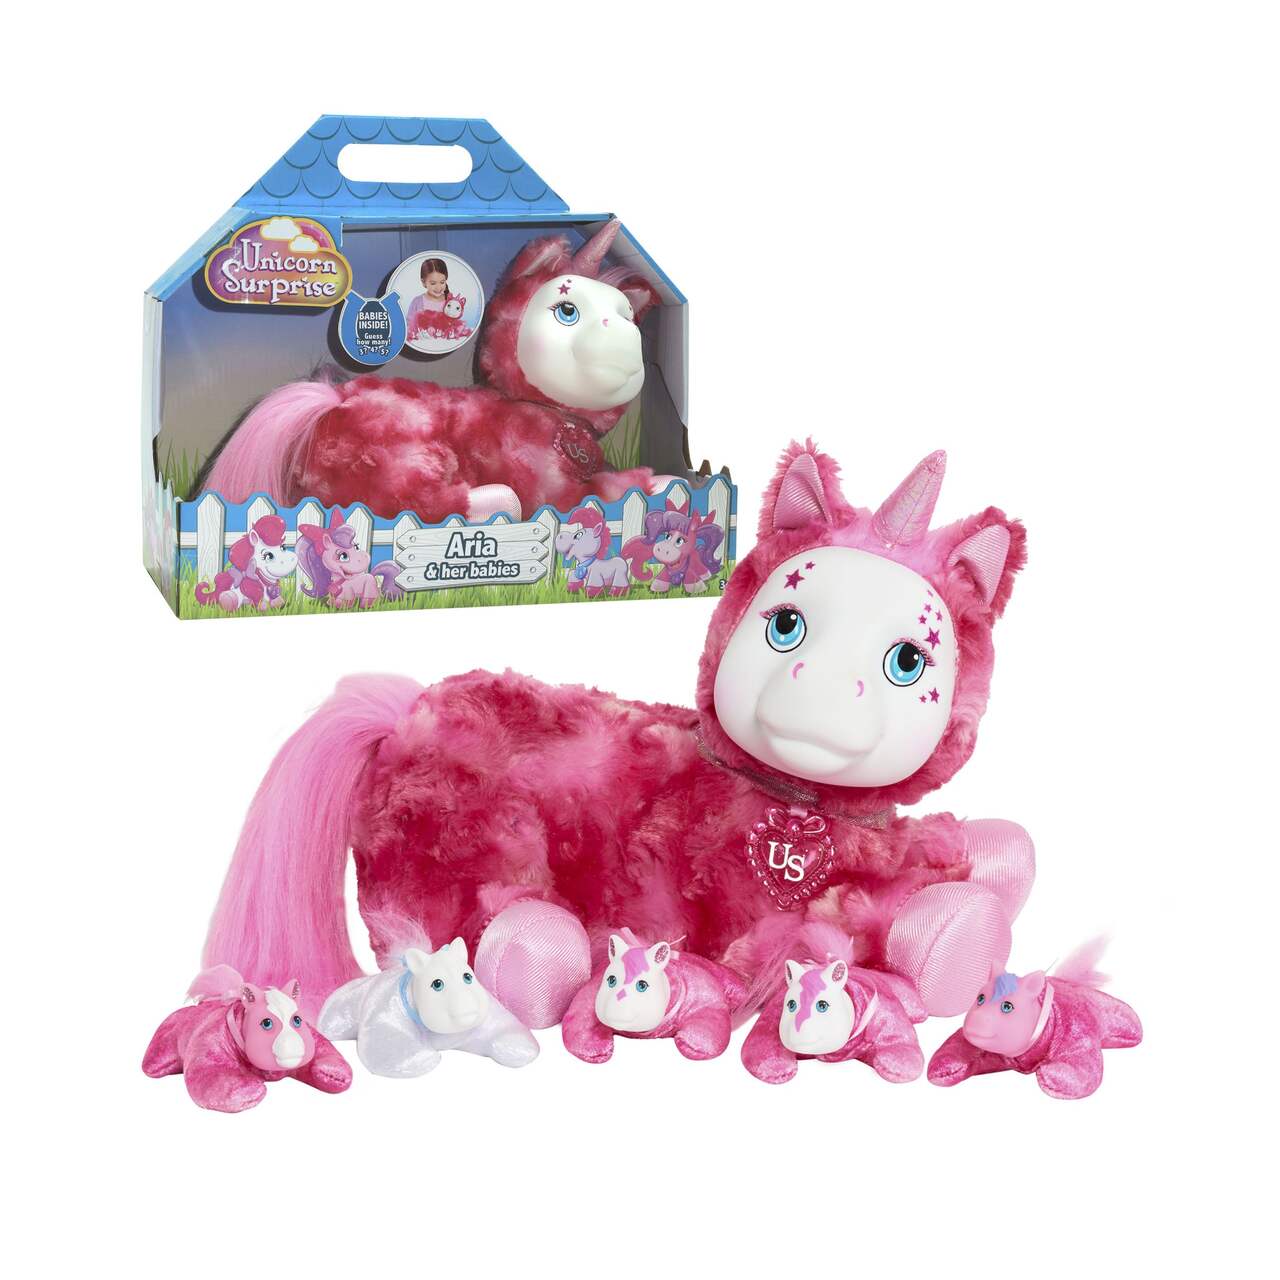 Zooey Unicorn Surprise, Aria & Her Babies, Soft Plush Stuffed Animal Toy  For Kids Ages 3+